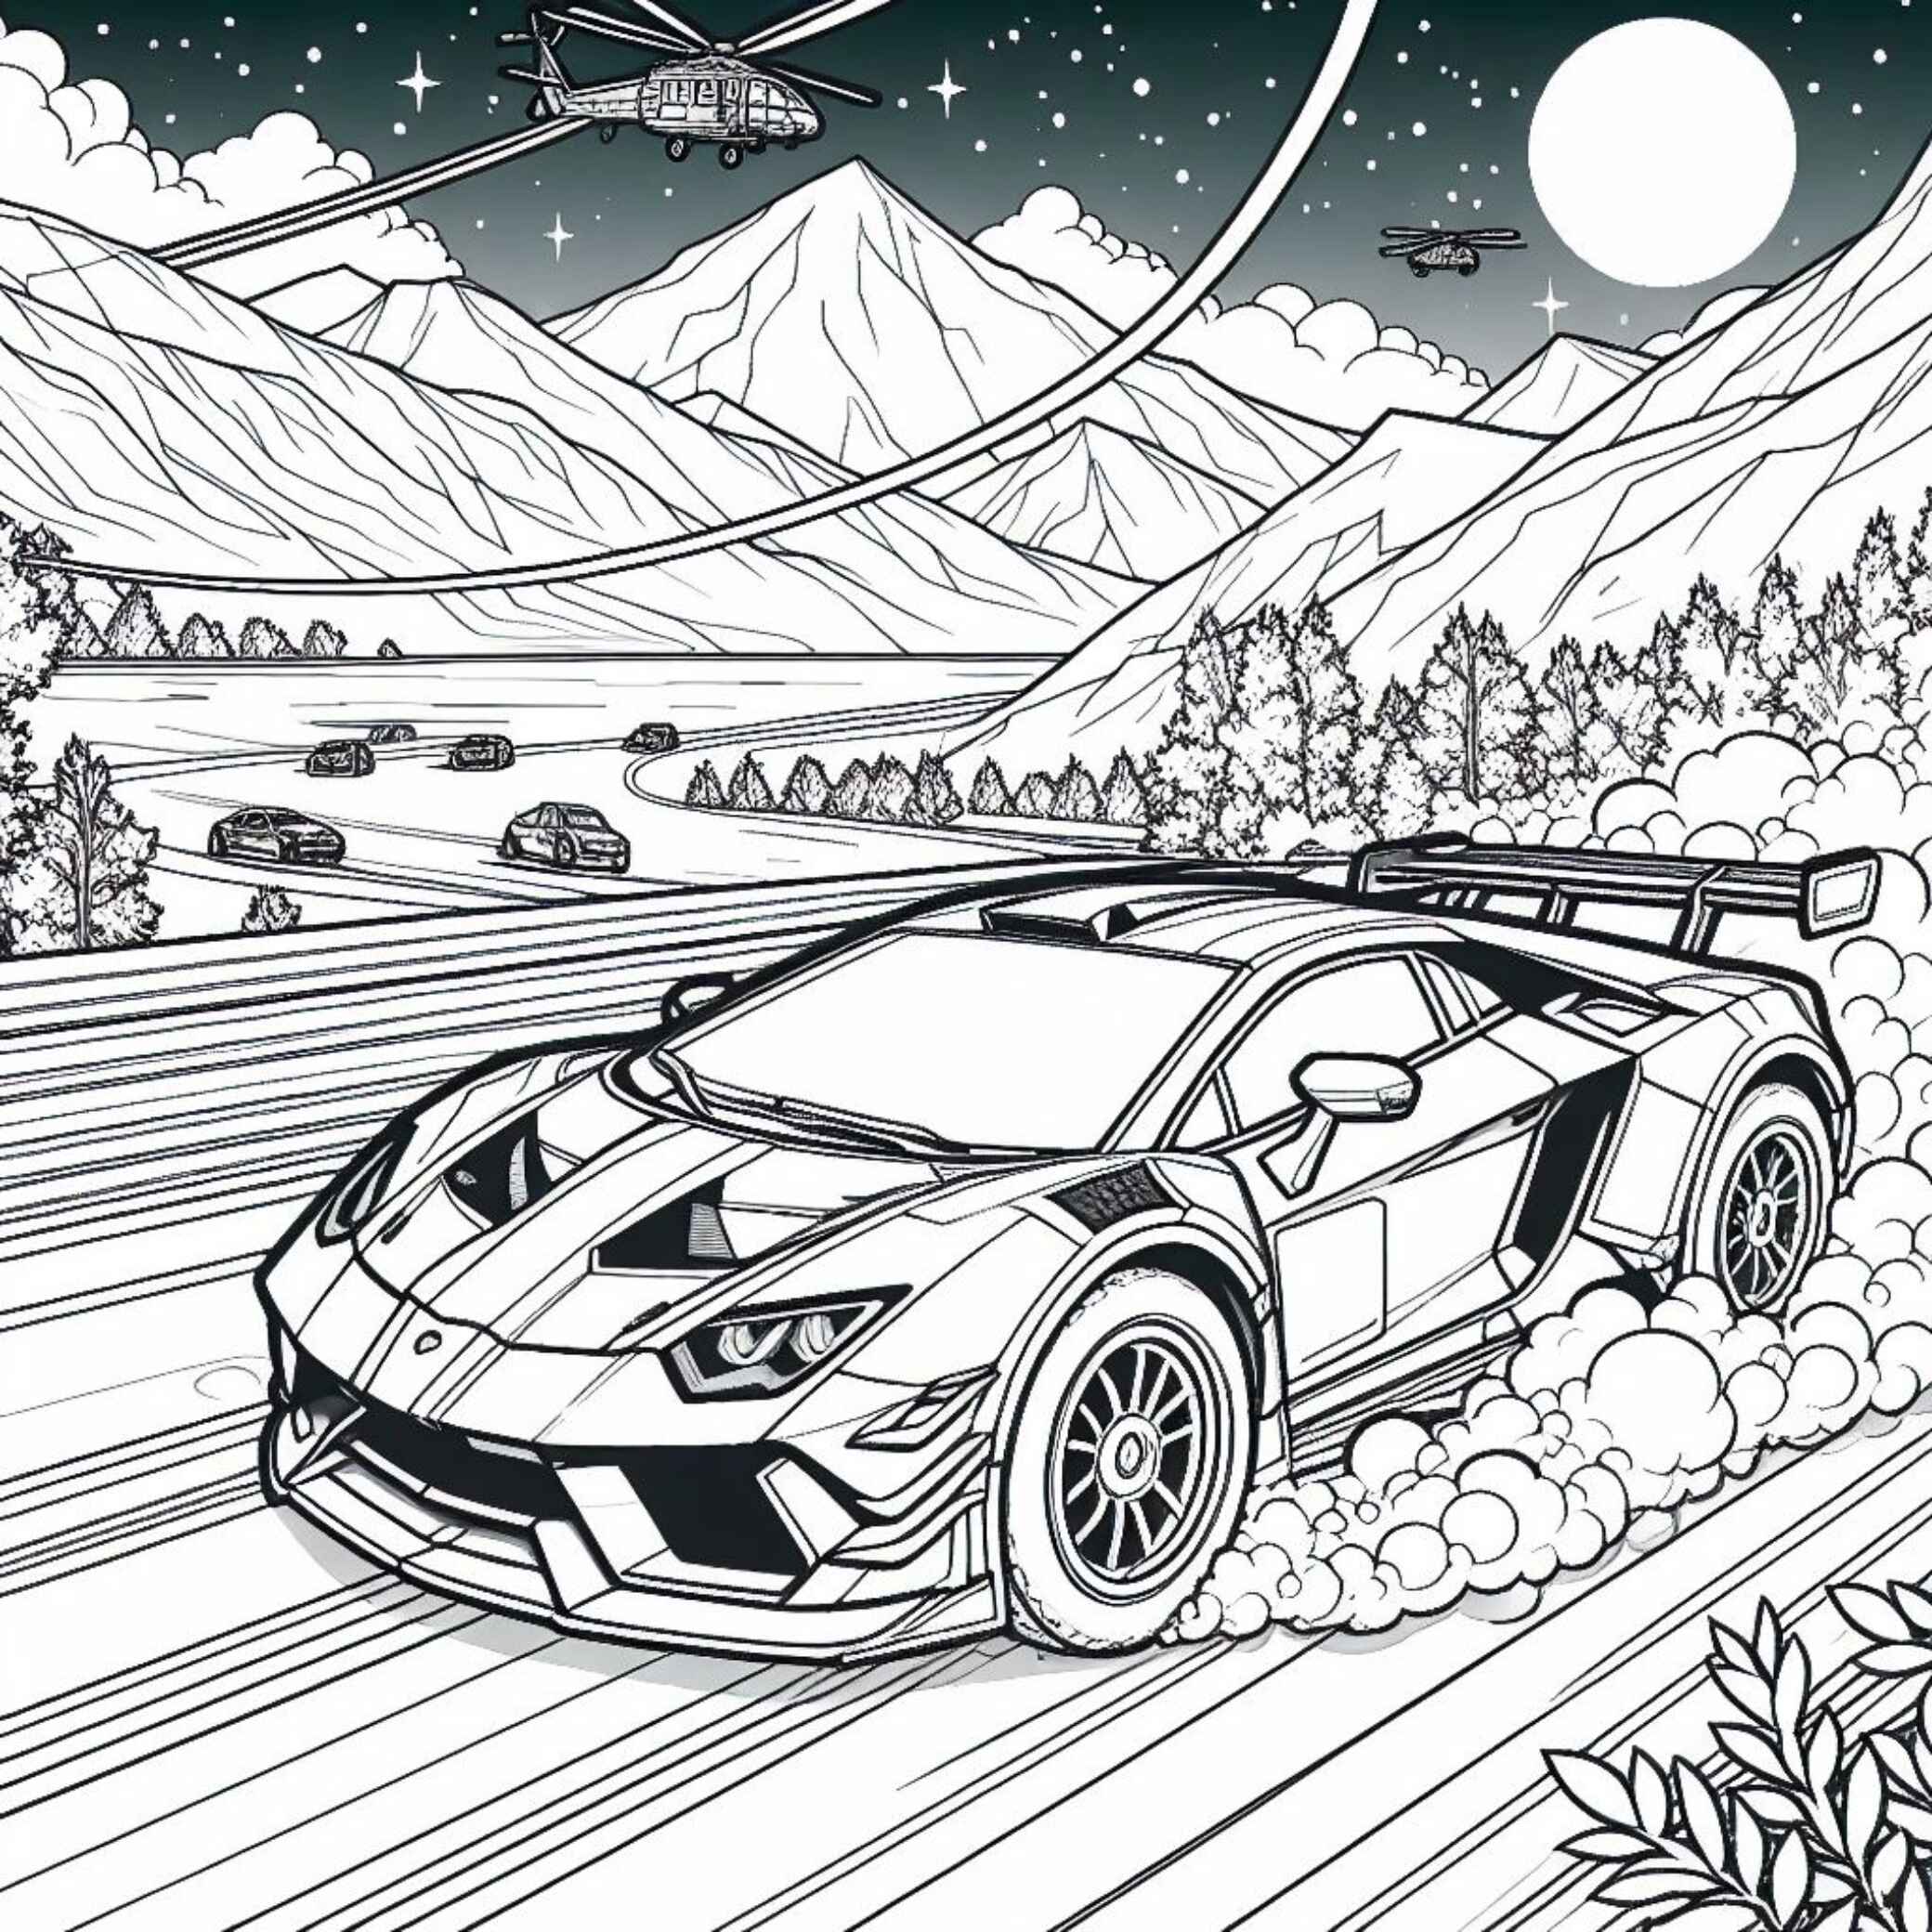 15 Lamborghini and Monster Truck Coloring pages in just 10$ preview image.